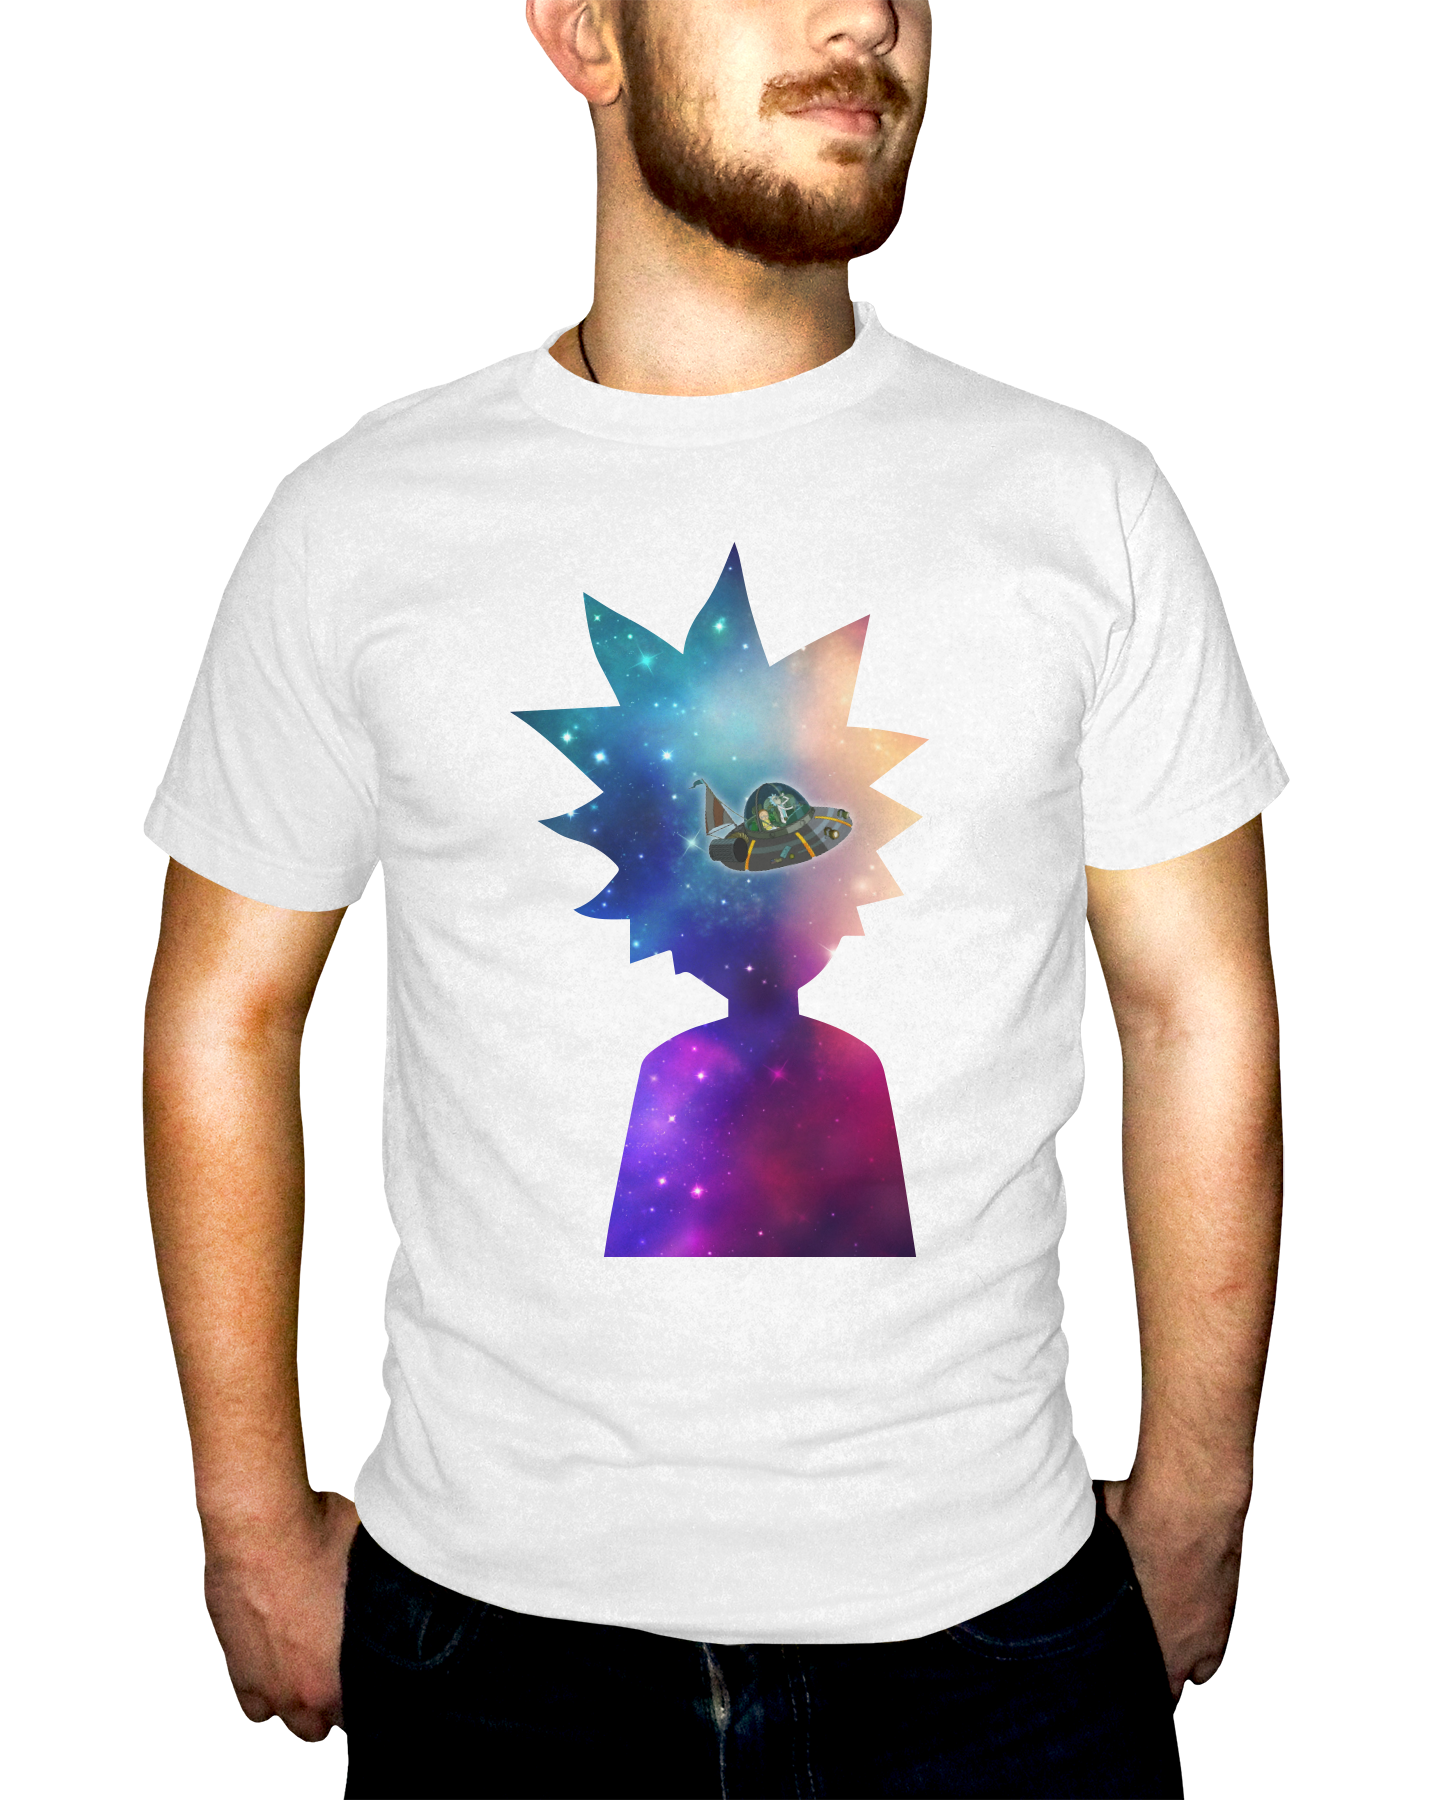 Unofficial Rick Space Silhouette Adult Short Sleeve Tee